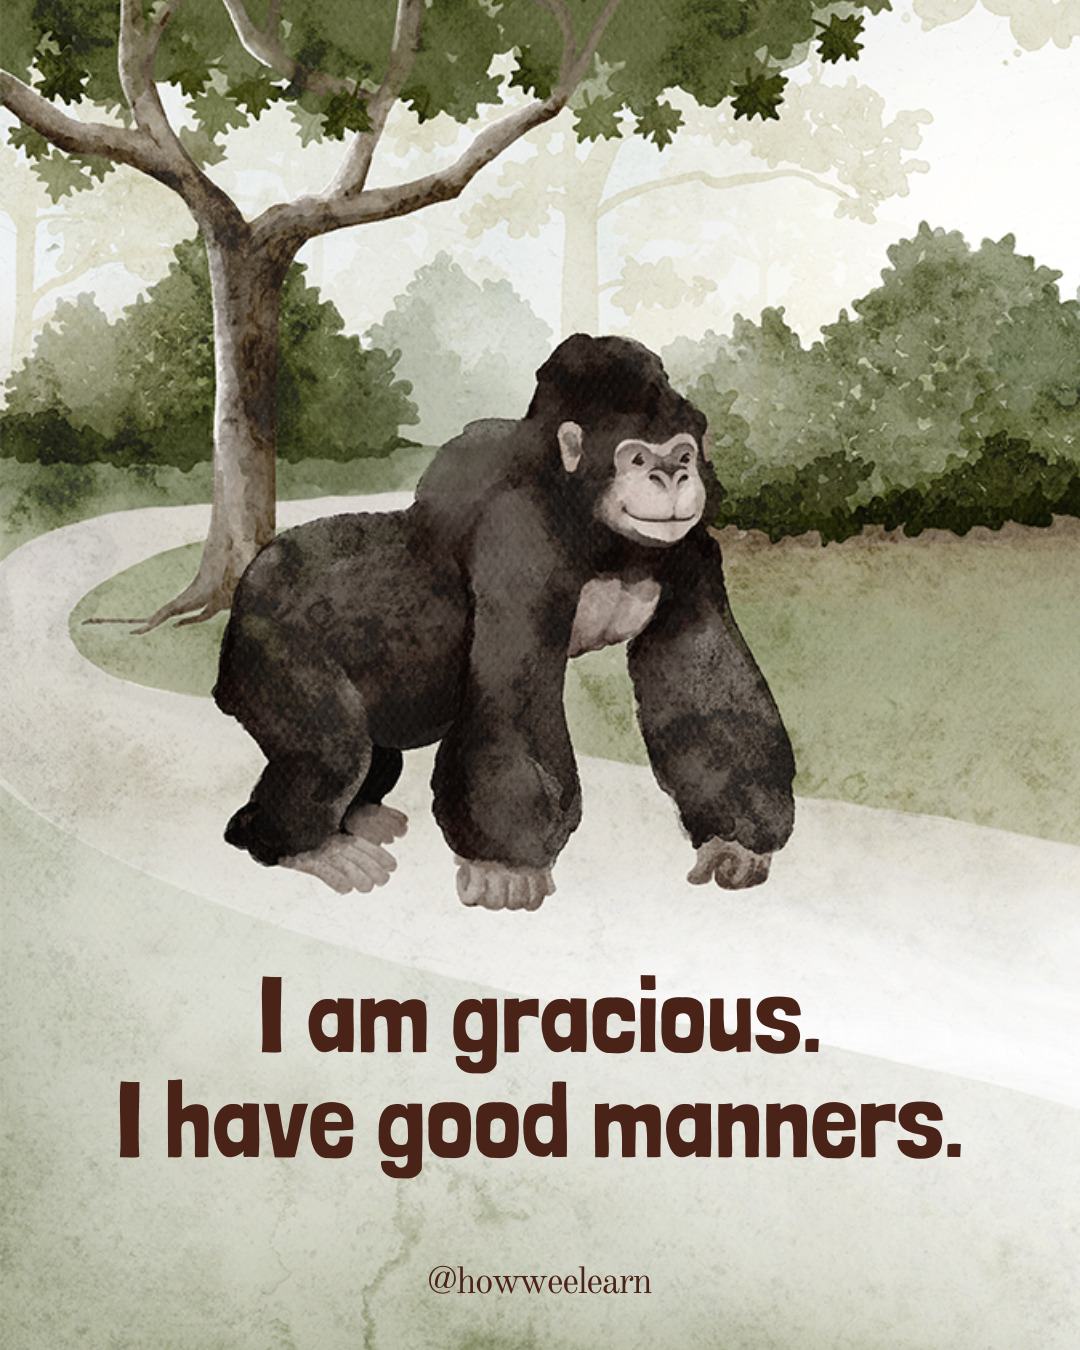 I am gracious. I have good manners.